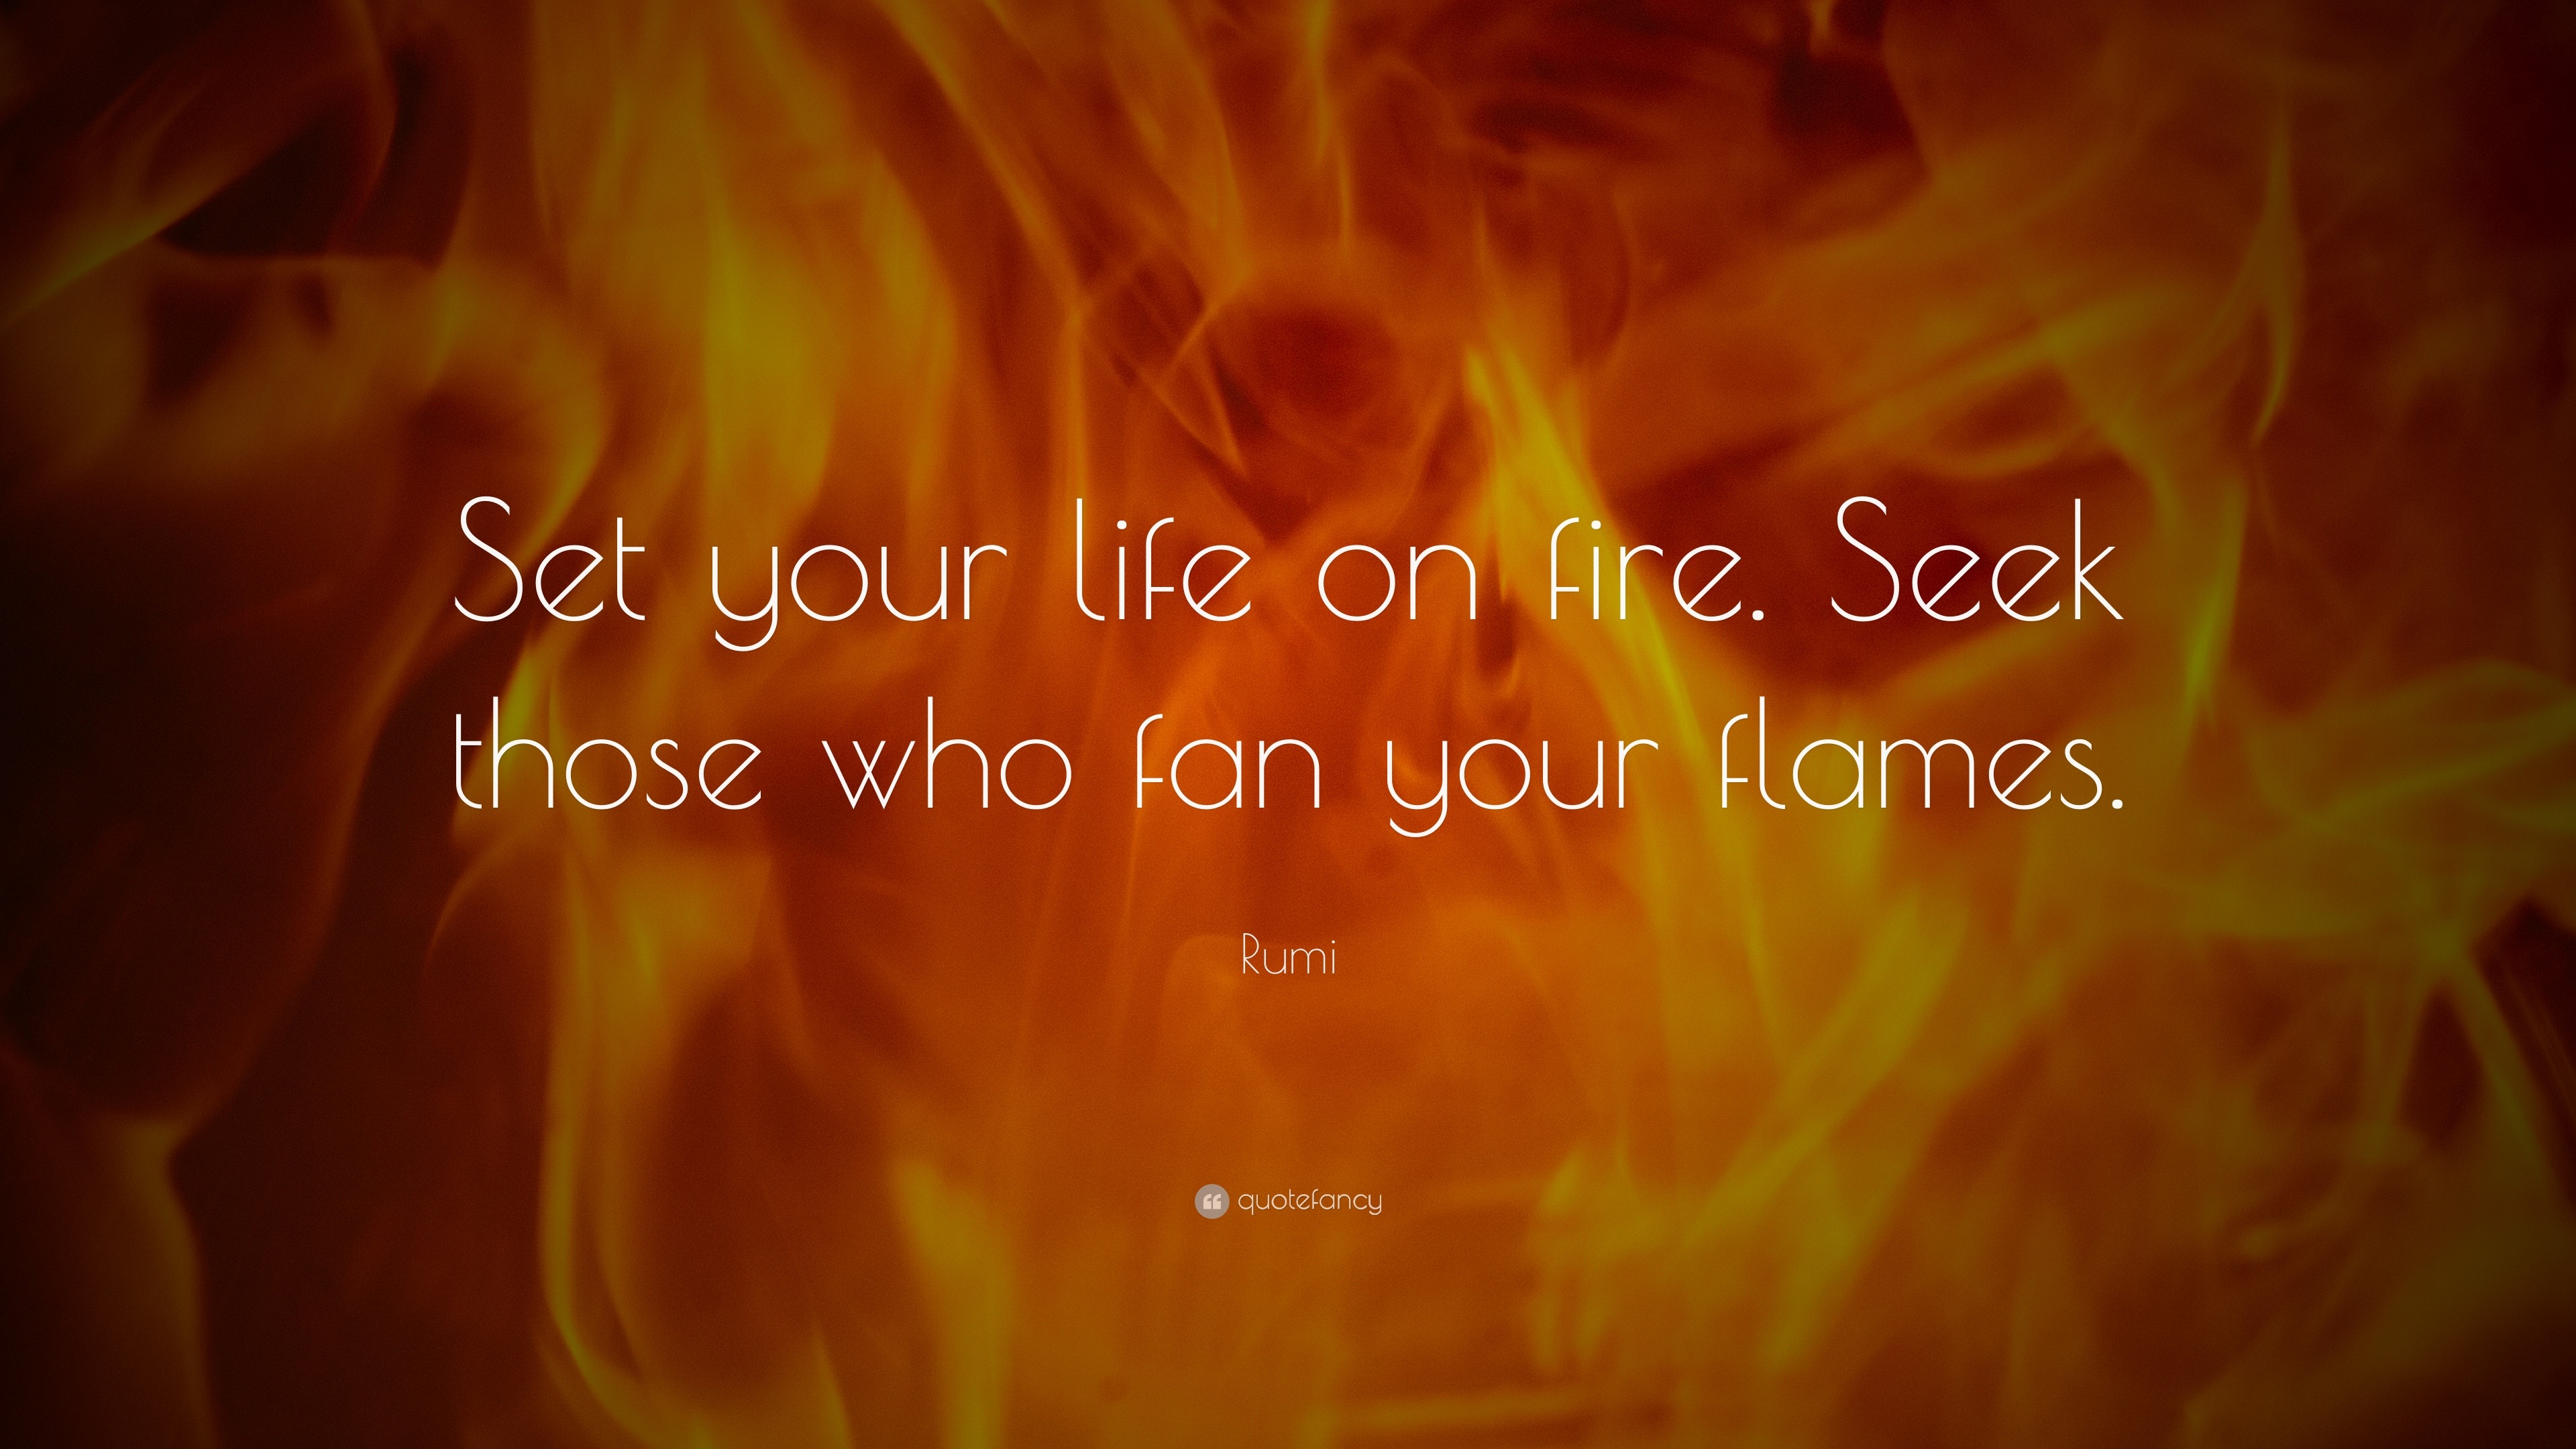 Catching Fire Quotes Wallpaper